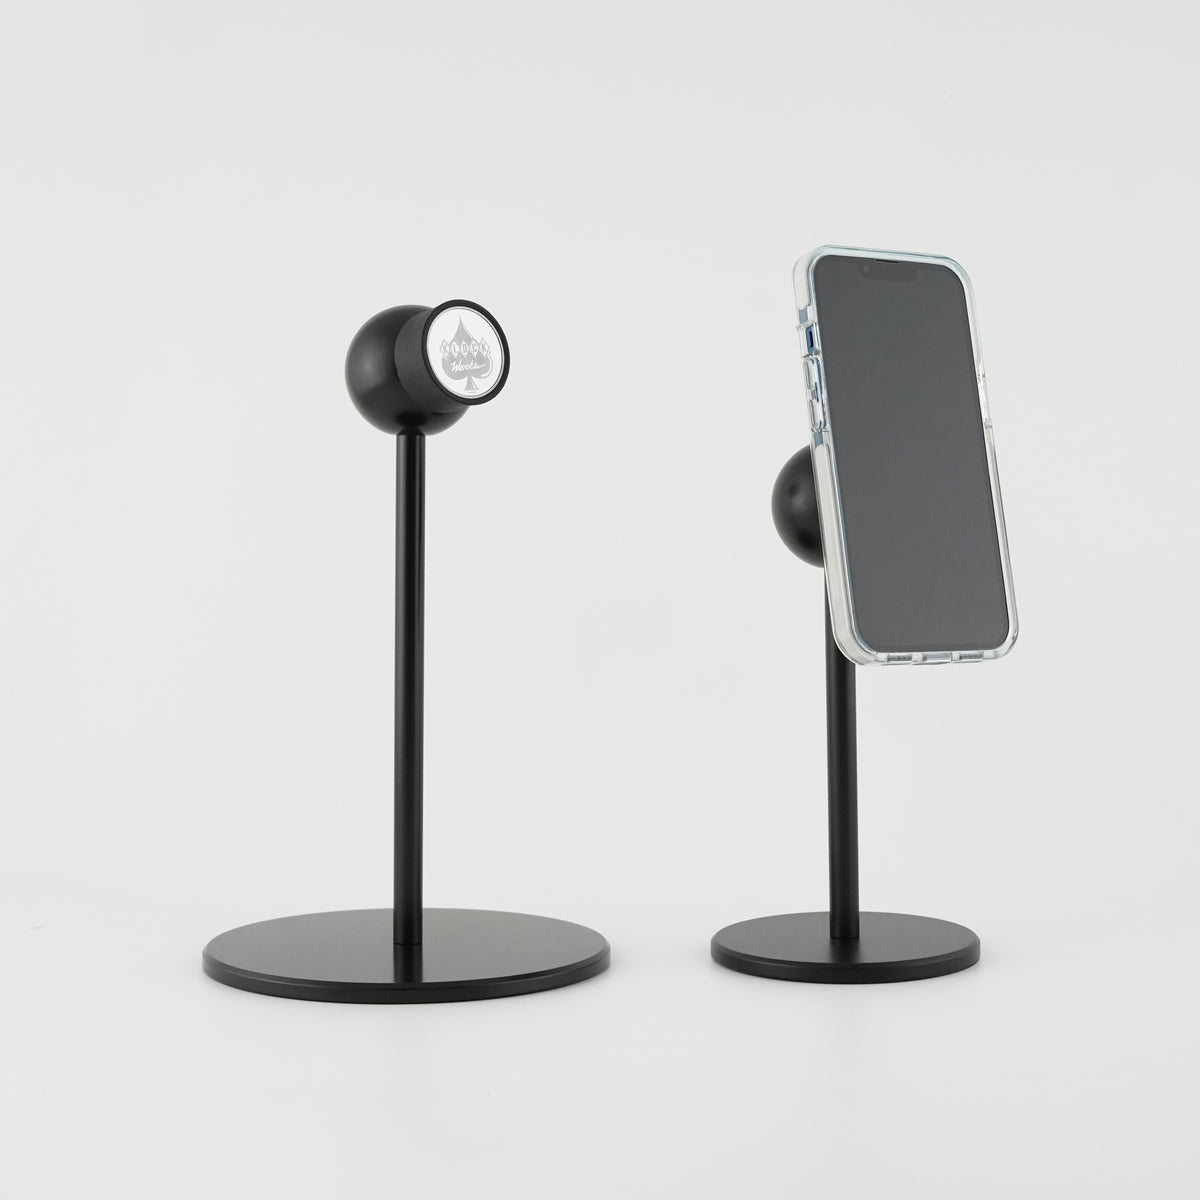 iOstand and iOmini phone mount side-by-side comparisson 